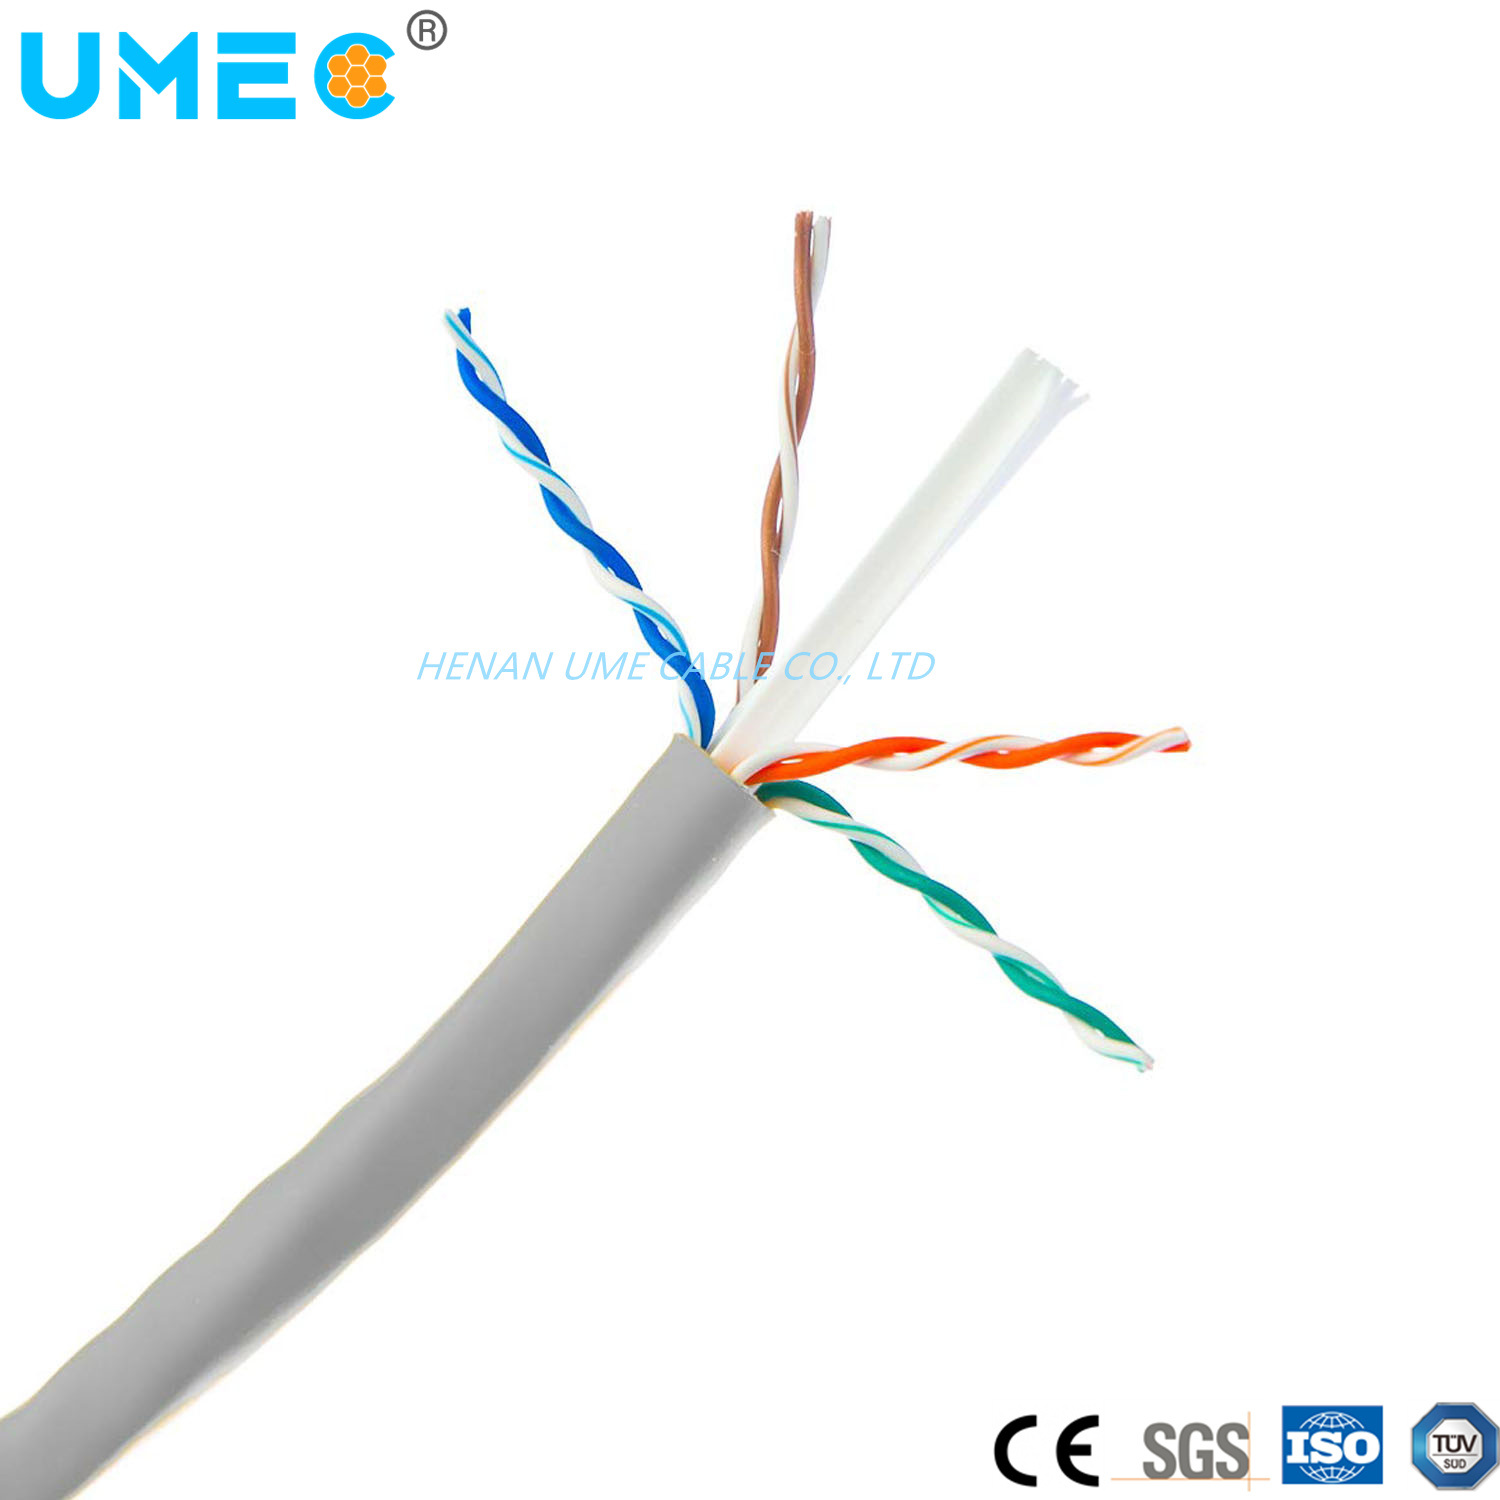 Made in China Network Type Ethernet Cable Cat5e/CAT6/Cat7 UTP Communication Cabling Patch Cord